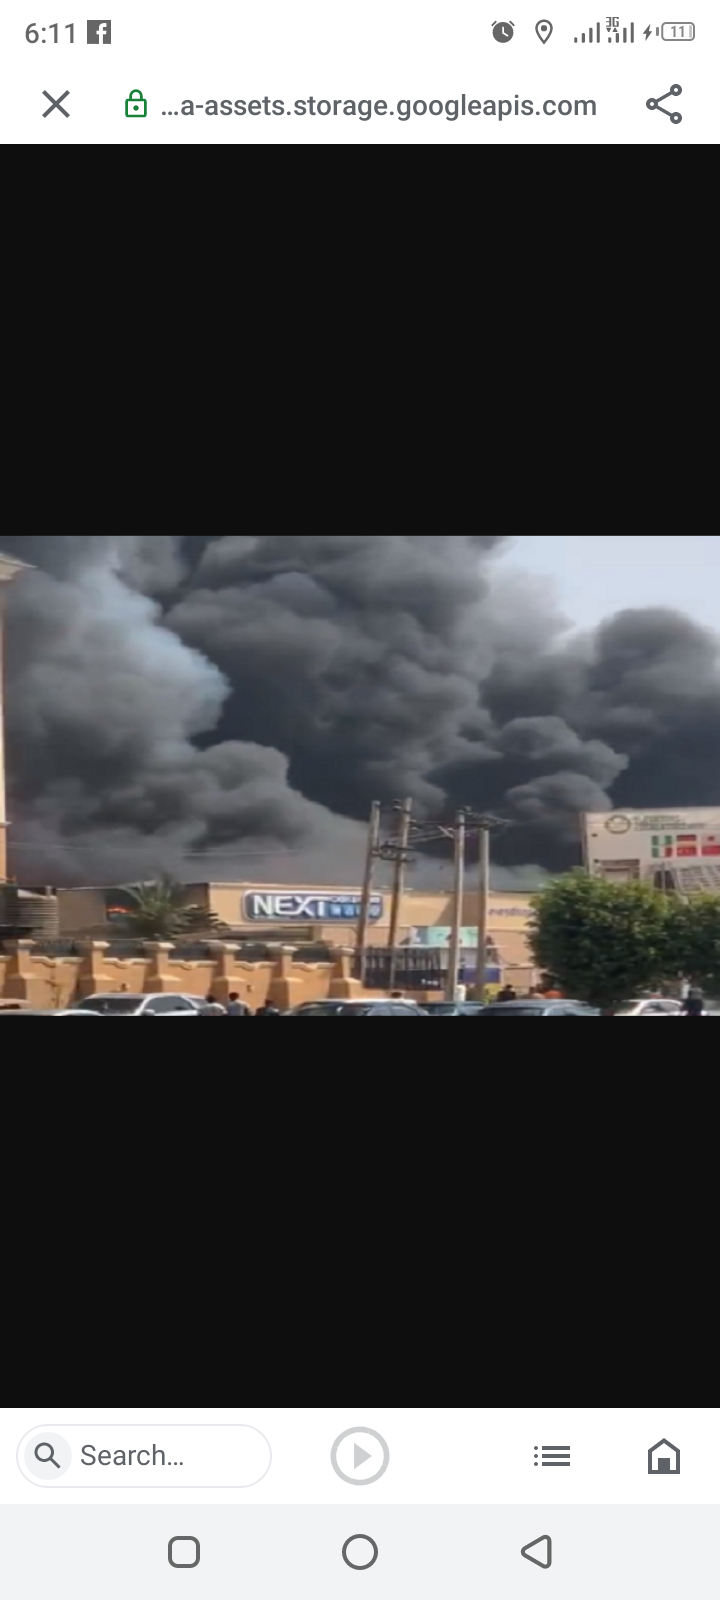 Cash and Carry Mall In Abuja On Fire